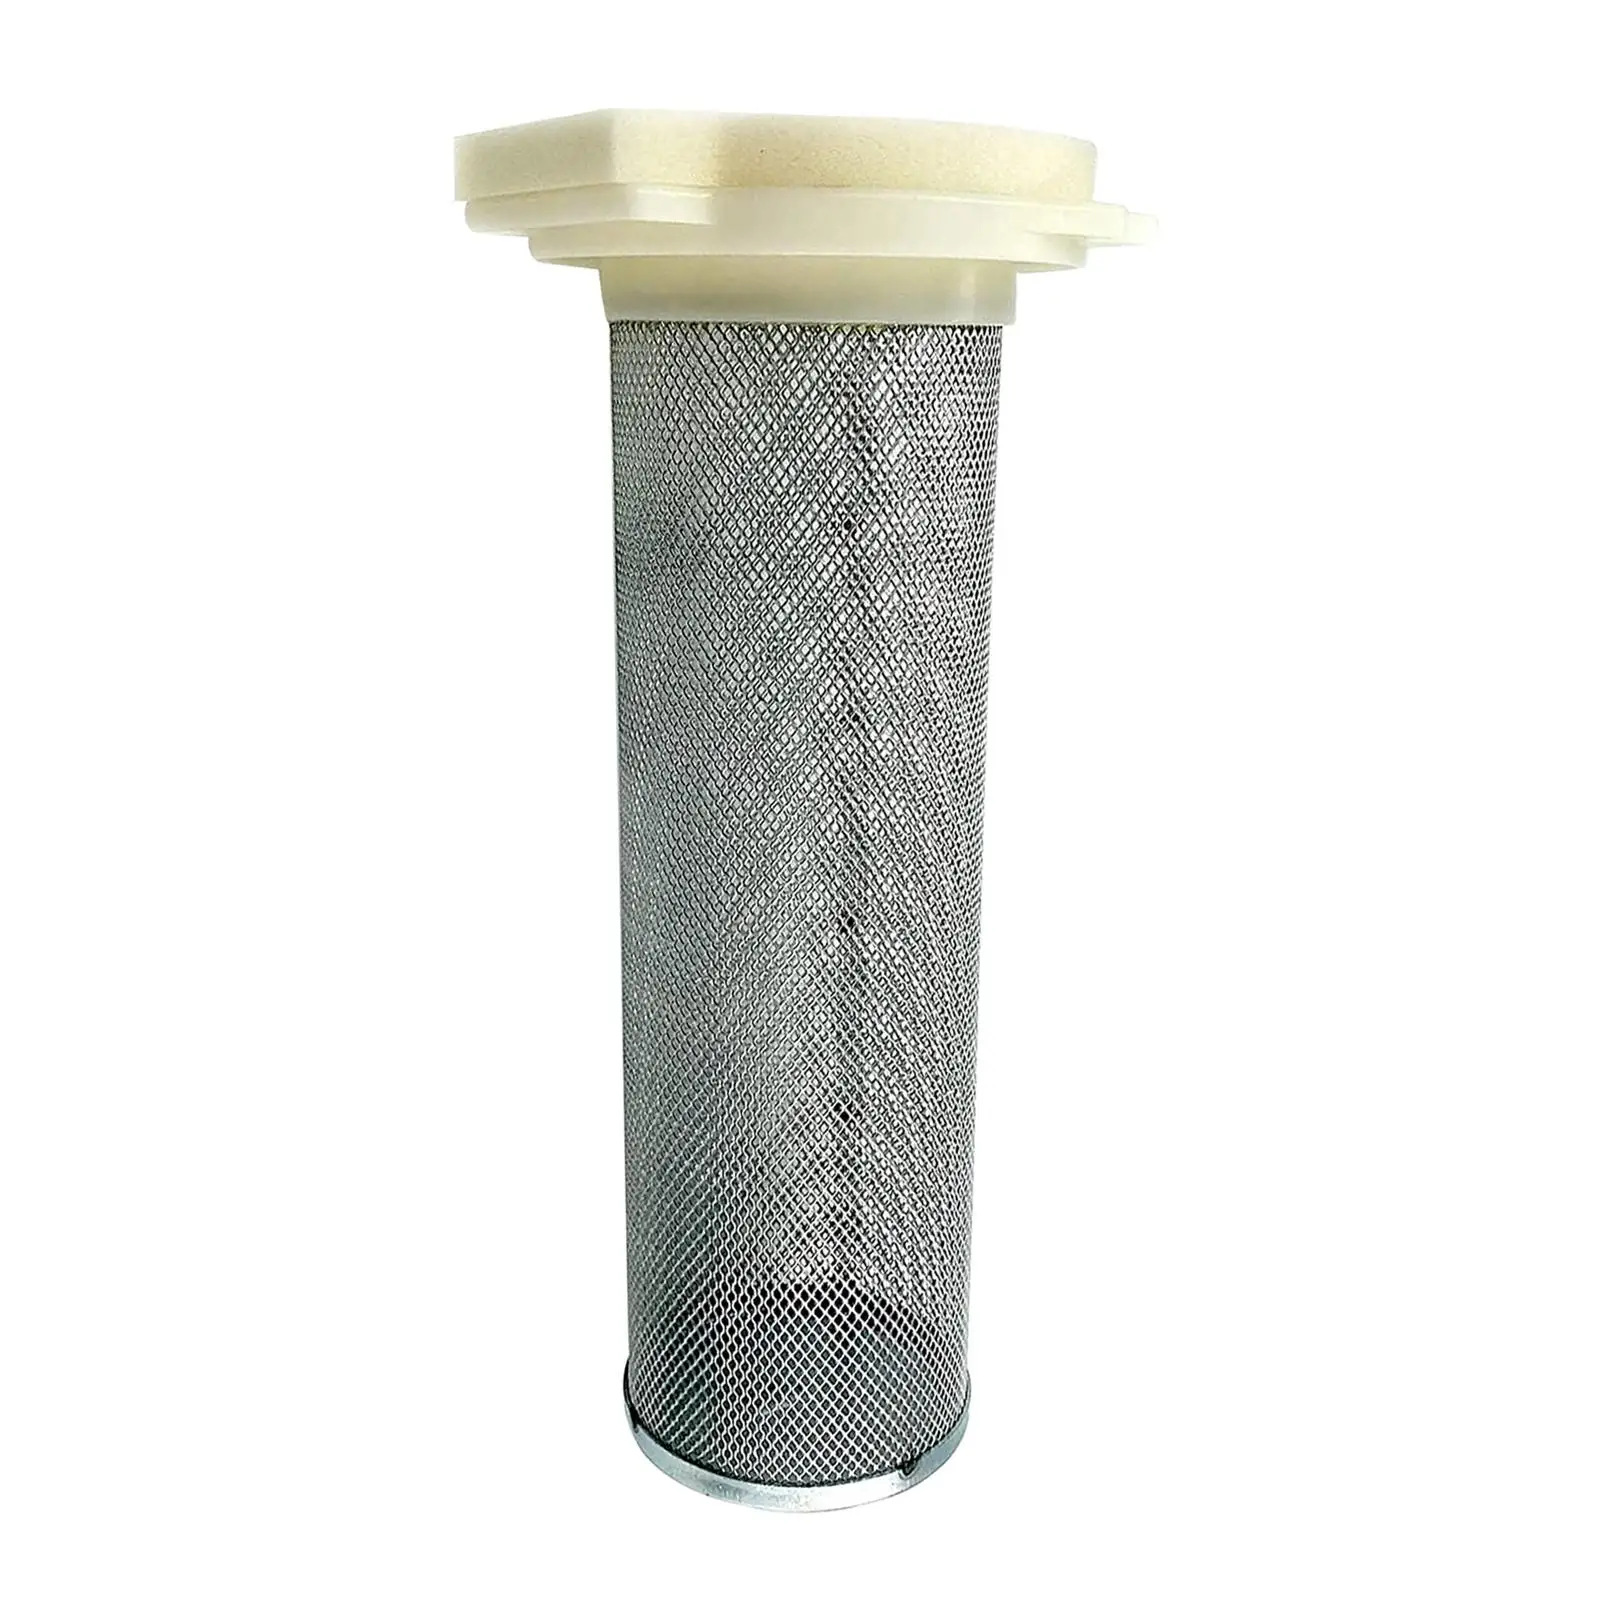 Intake Valve Air Filter Cage 1Uy-14458-01-00 for    350 Replaces